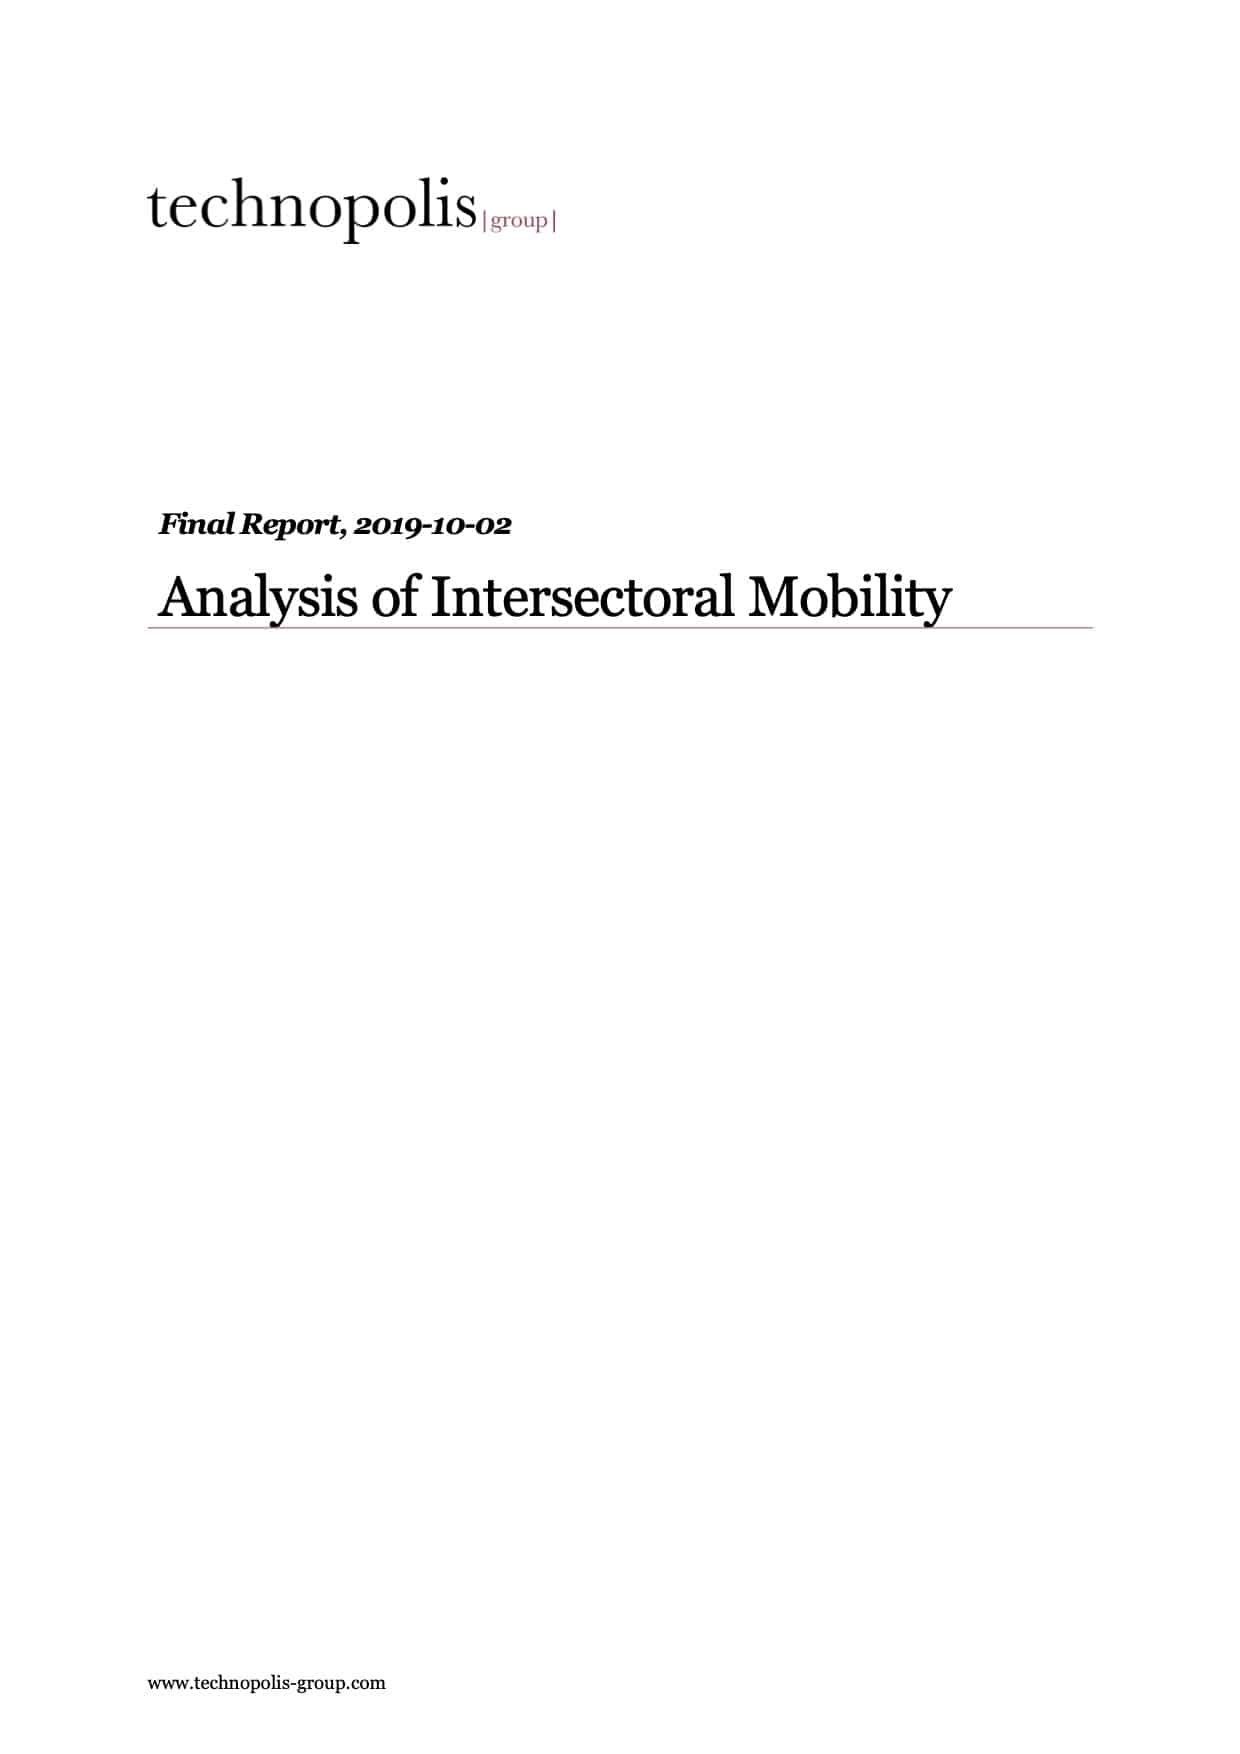 Analysis of Intersectoral Mobility